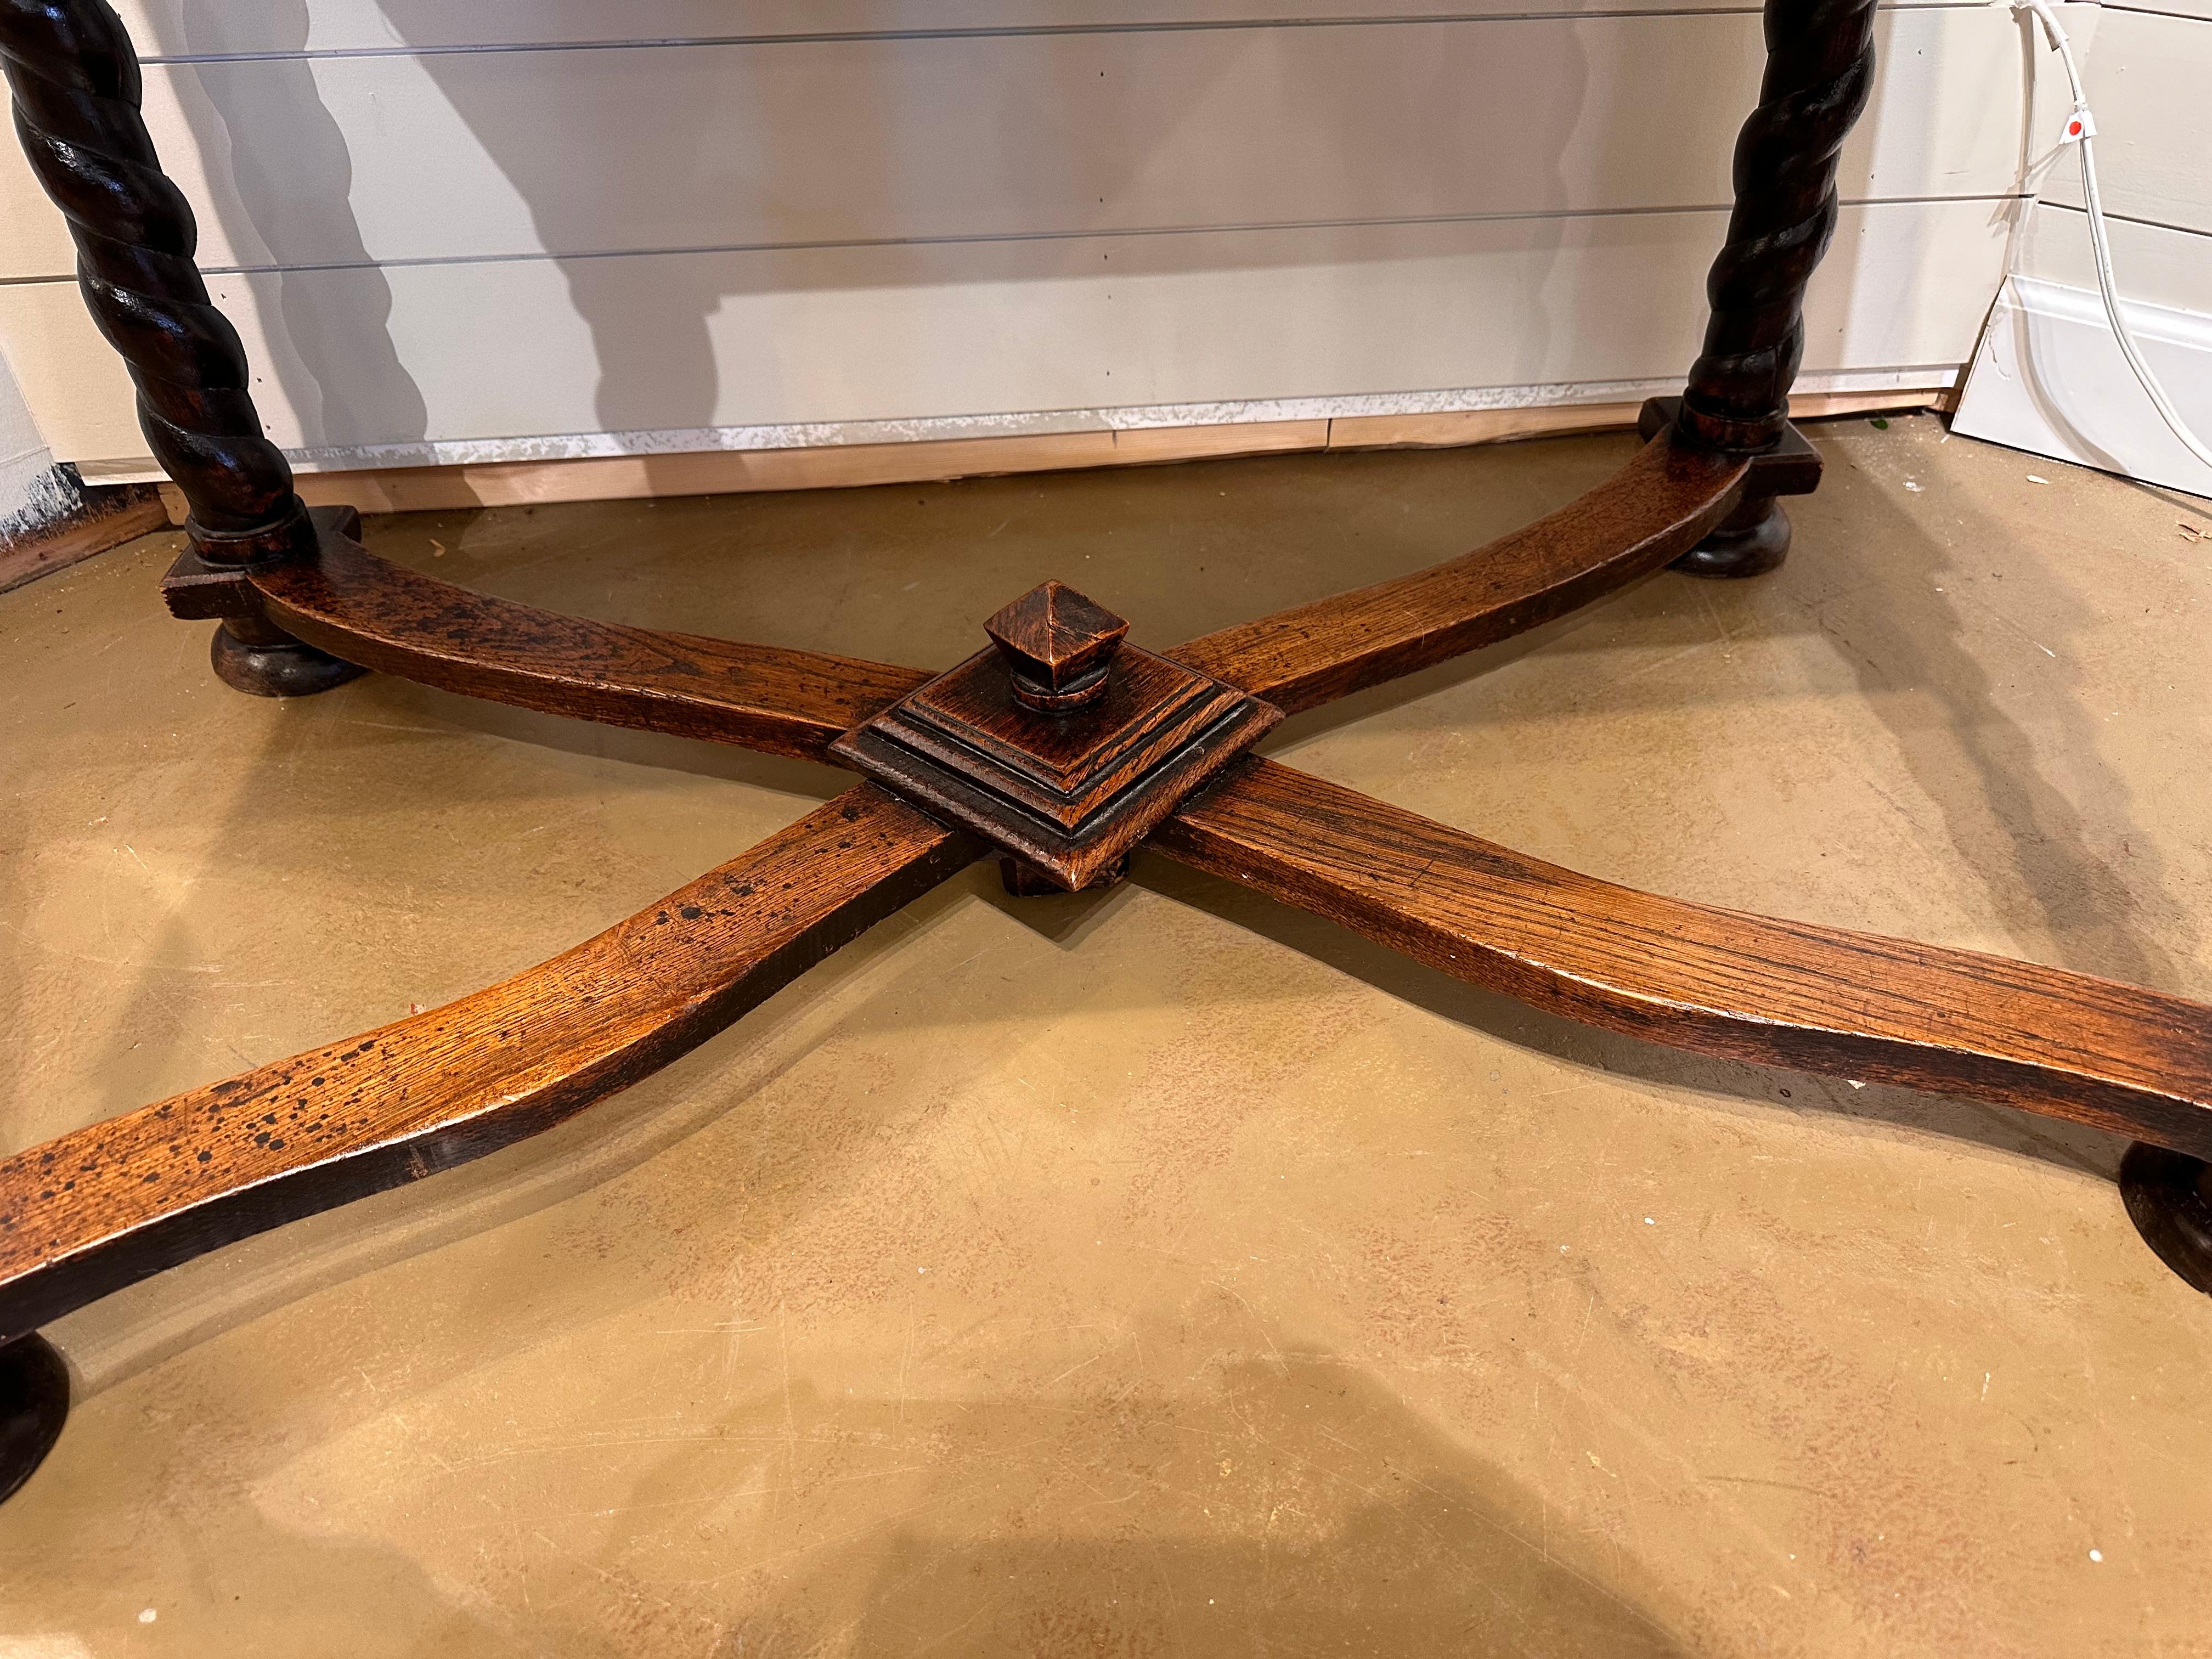 This is an amazing mid 19th century Italian table resting on four gently turned legs with diamond an accent around all four sides so this table could sit in the center of an entryway. Also pay close attention to the stretchers on the bottom the age